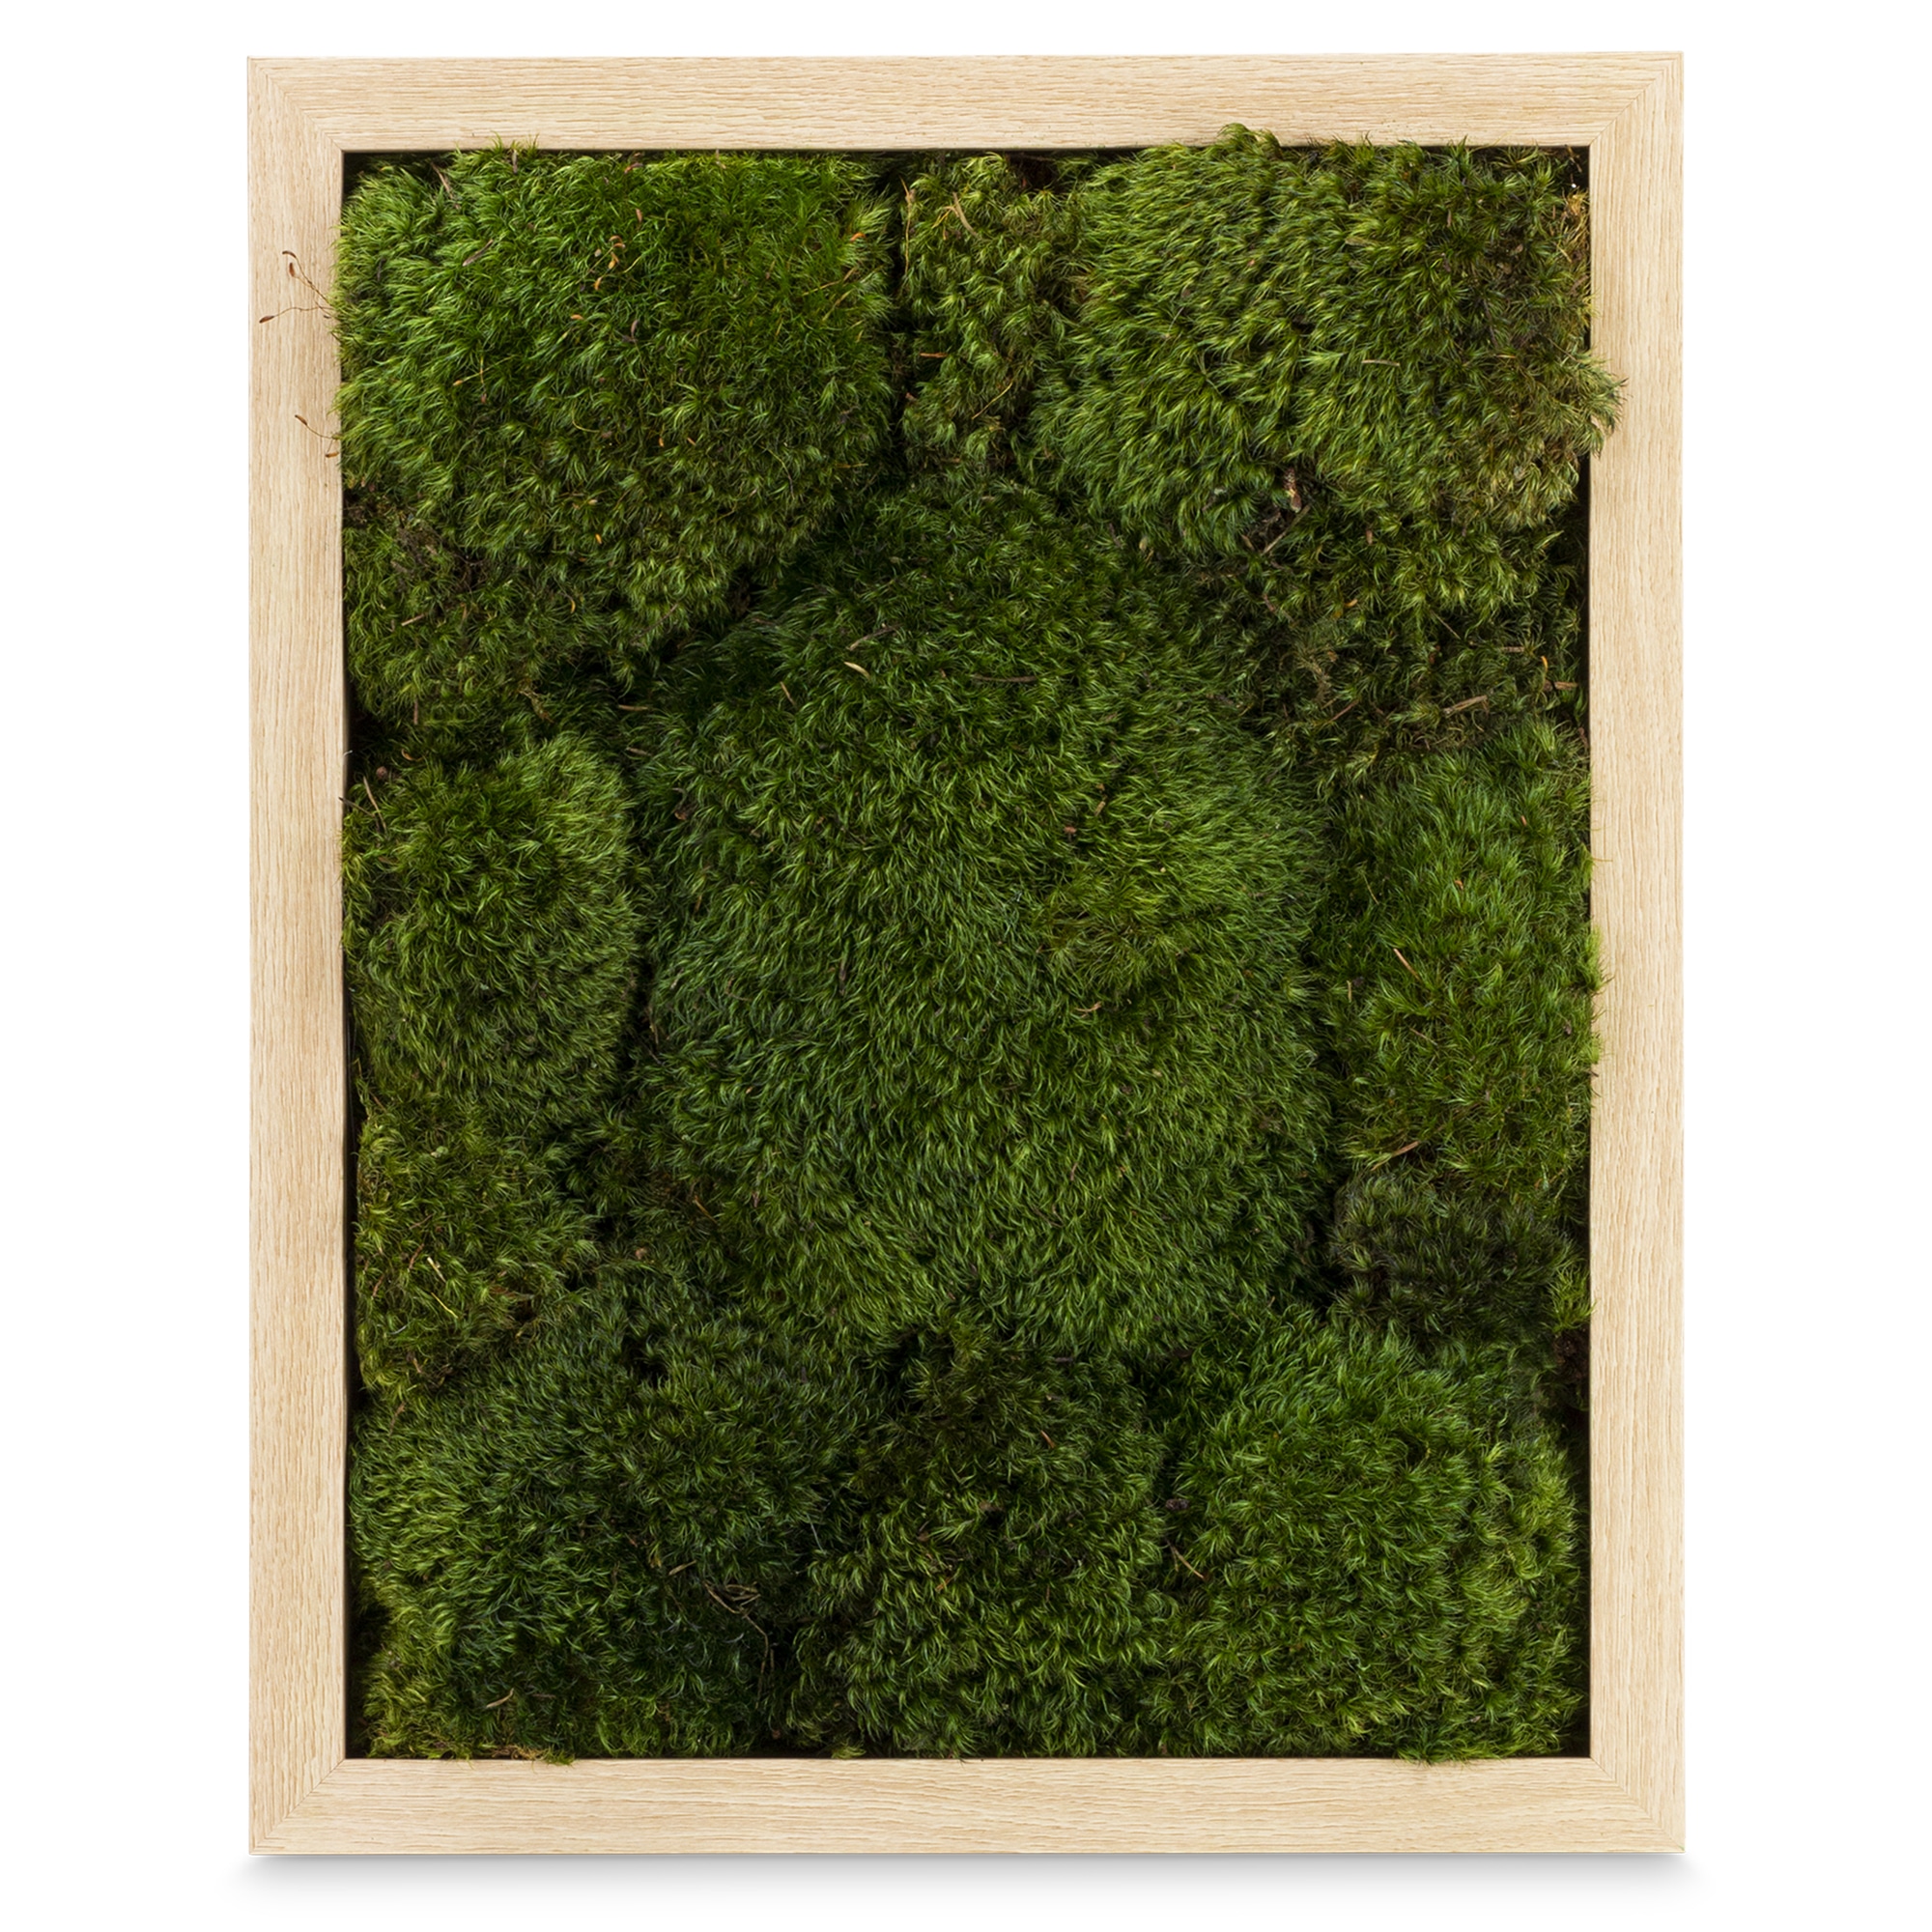 Live Mood Moss Wall Art in Natural Wood